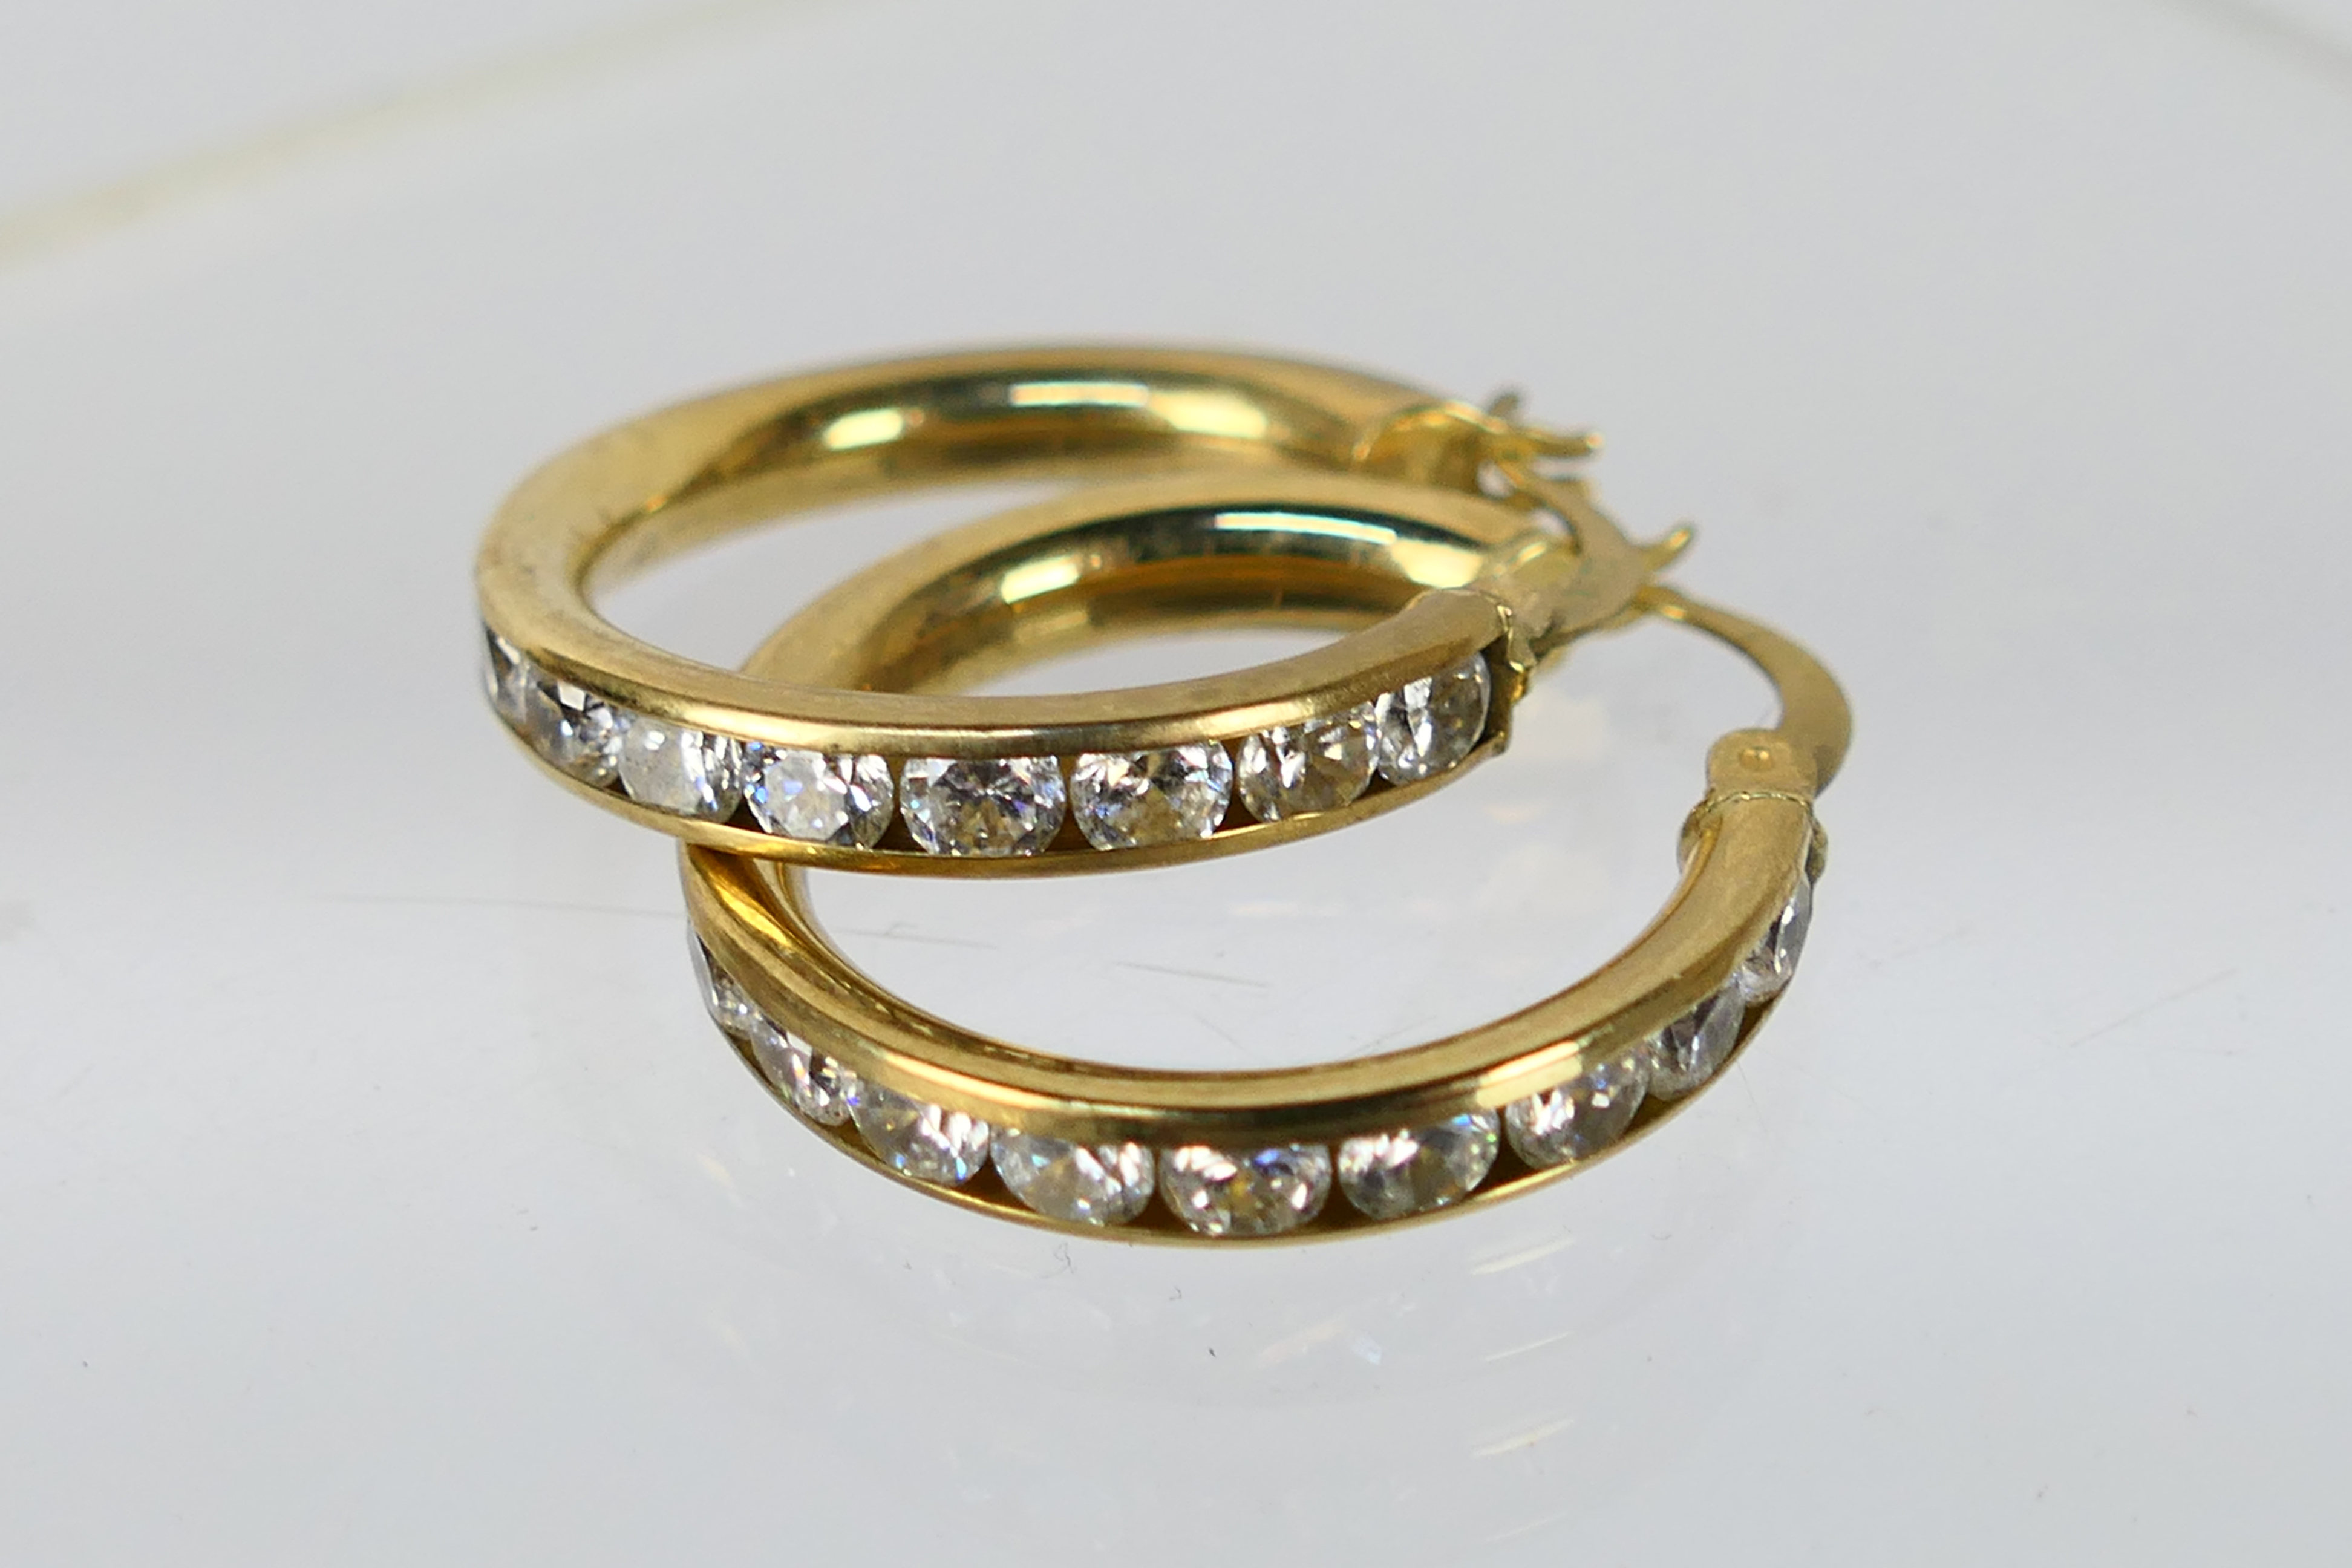 A pair of 9ct yellow gold, stone set ear hoops, approximately 3.7 grams. - Image 2 of 4